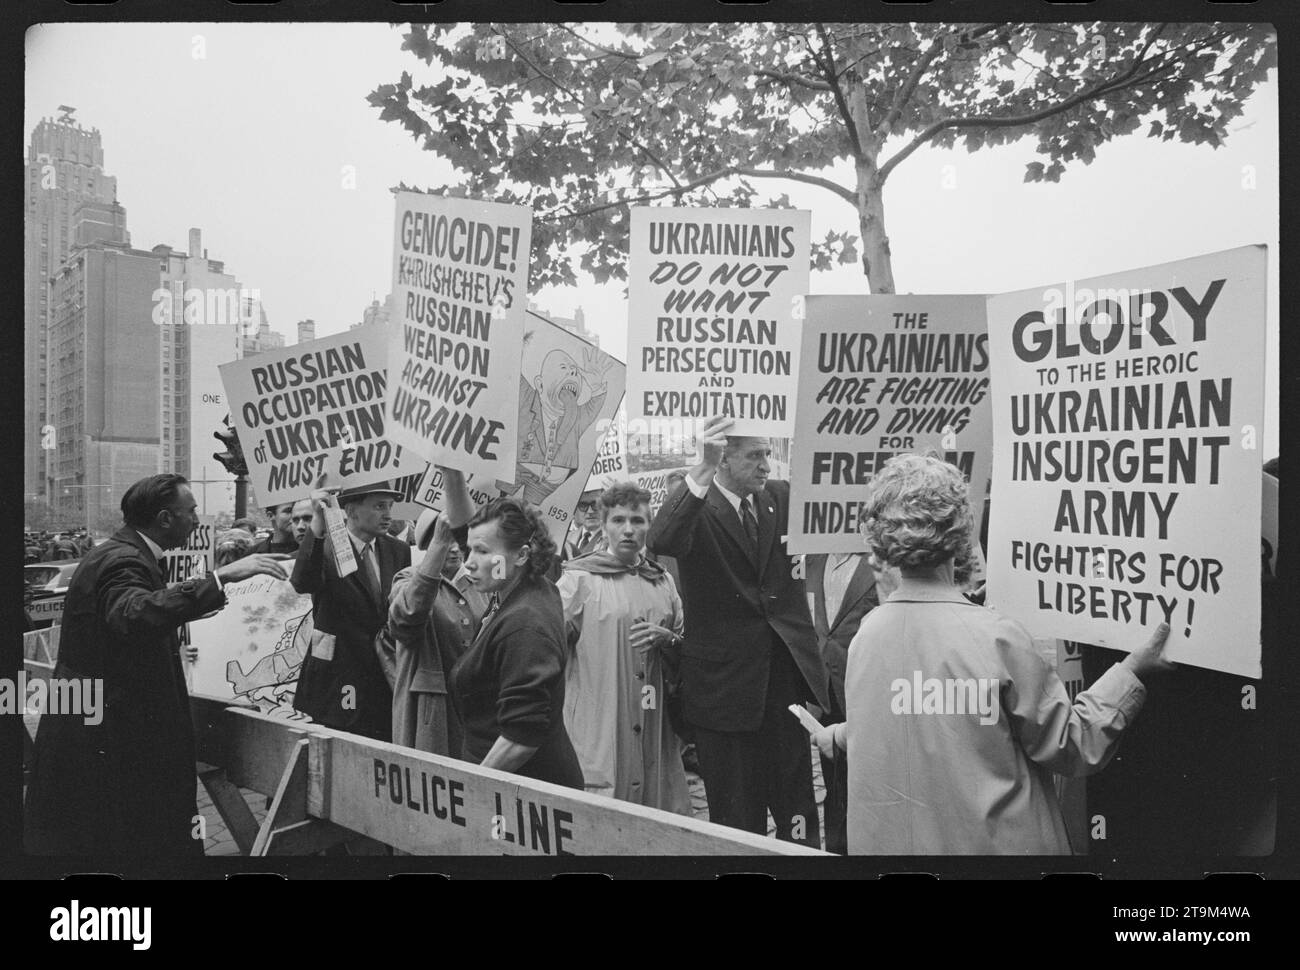 Demonstrators with signs against the Soviet occupation of Ukraine protest the visit of Soviet Premier Nikita Khrushchev, near the United Nations building, New York, New York, 9/20/1960. (Photo by Marion S Trikosko/US News and World Report Magazine Collection) Stock Photo